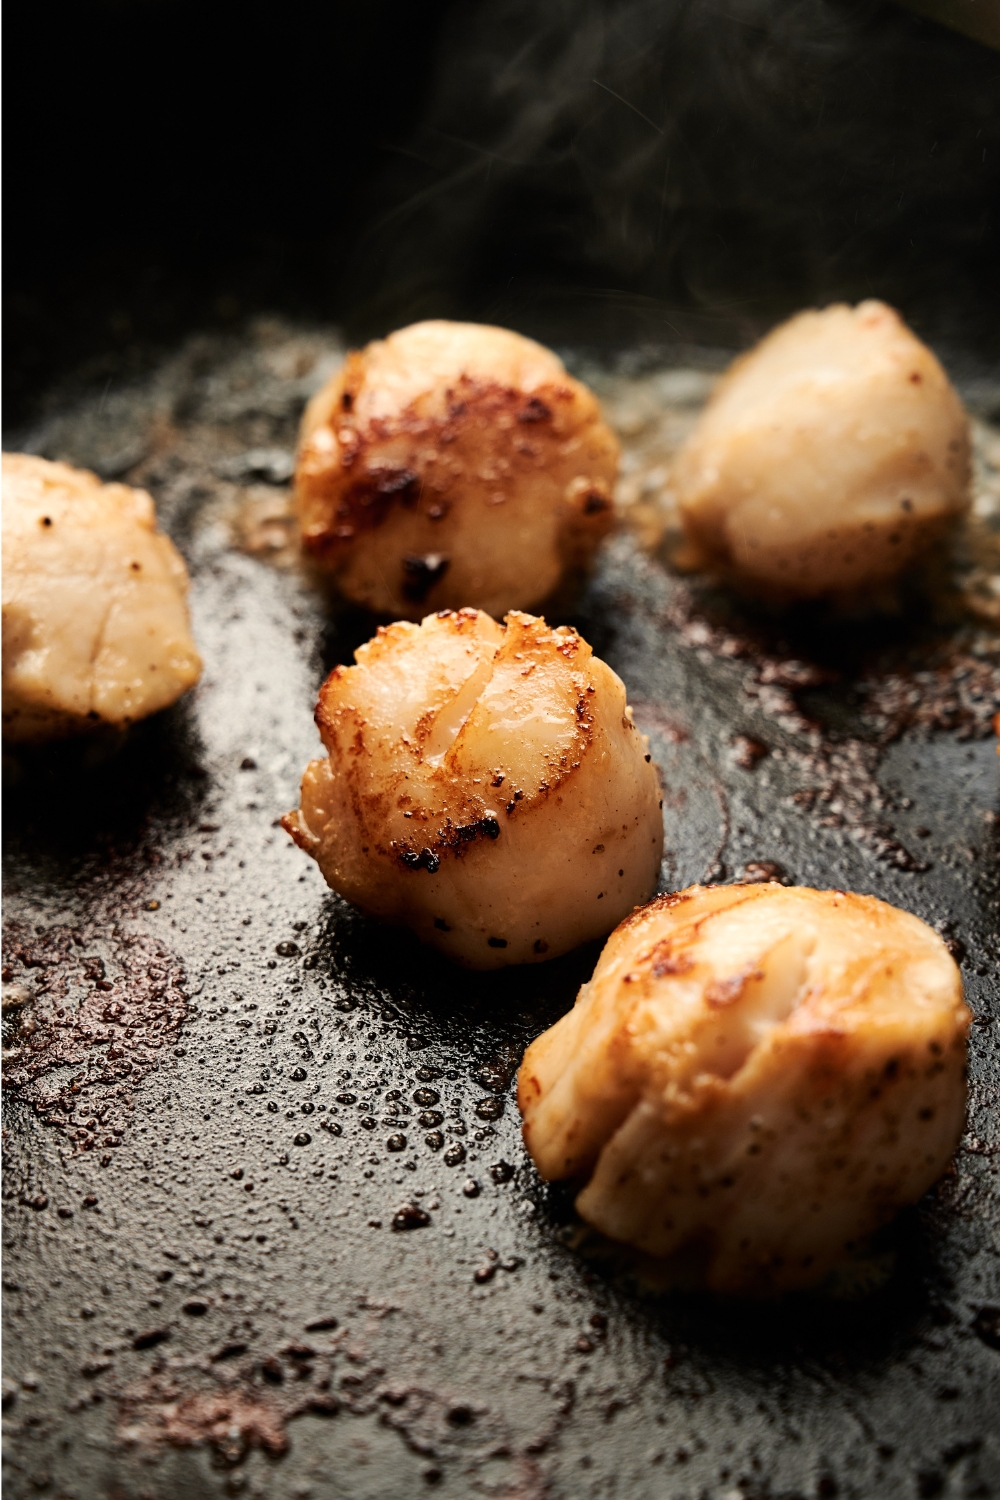 A frying pan with golden brown scallops cooking.